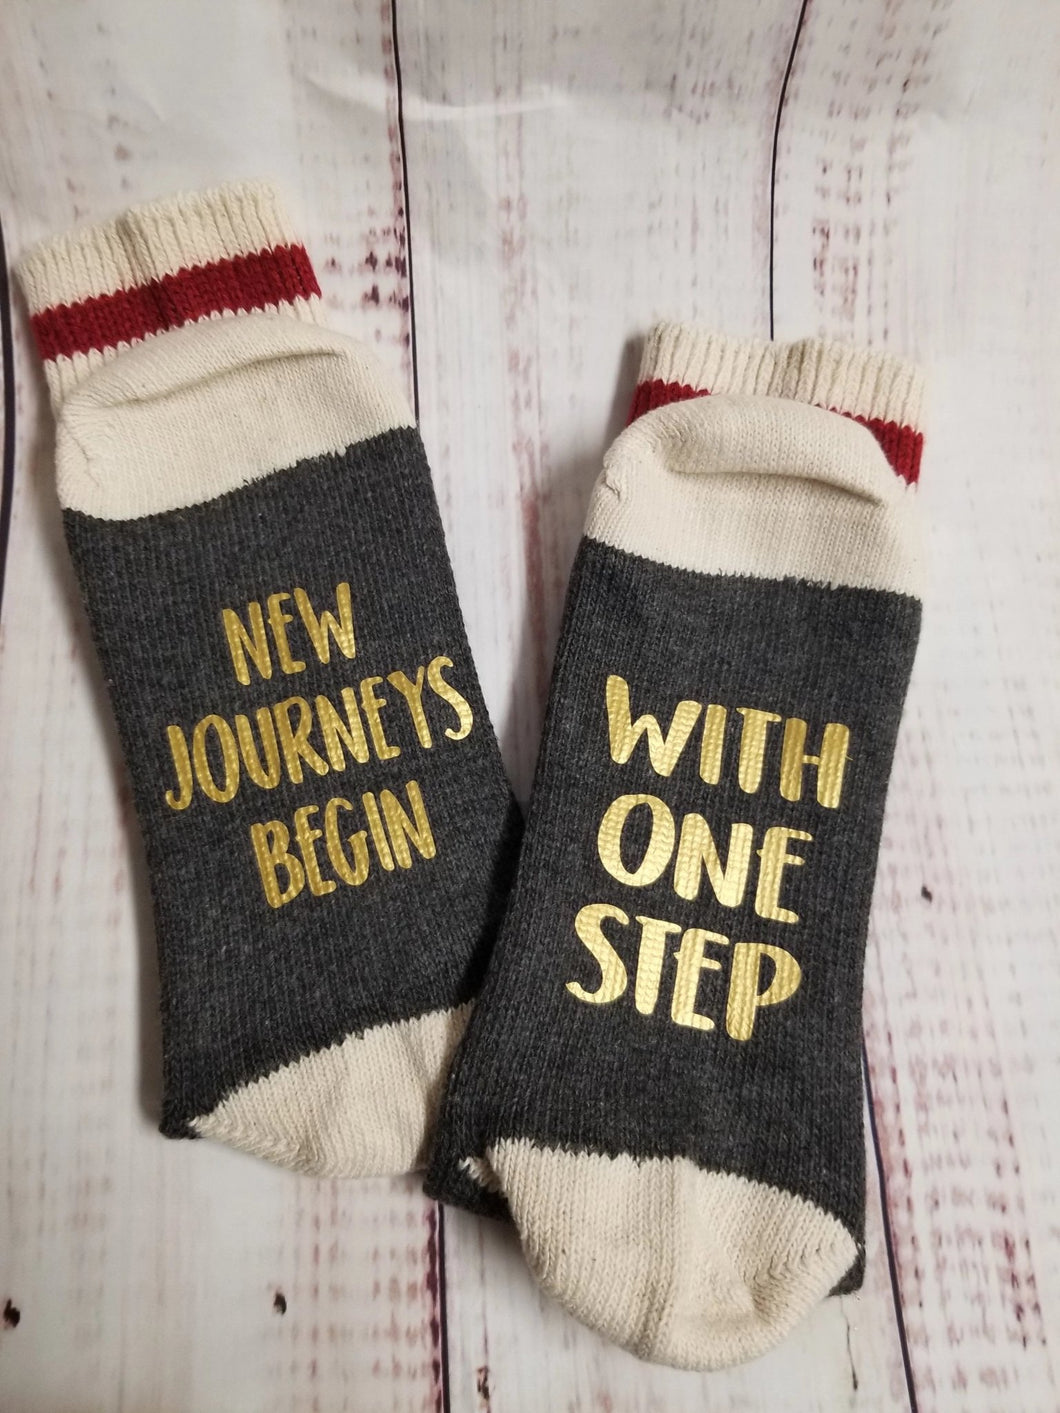 New journey begins with one step, Prayer Socks, Lucky Socks, IVF Socks - My Other Child / Blooms n' Rooms